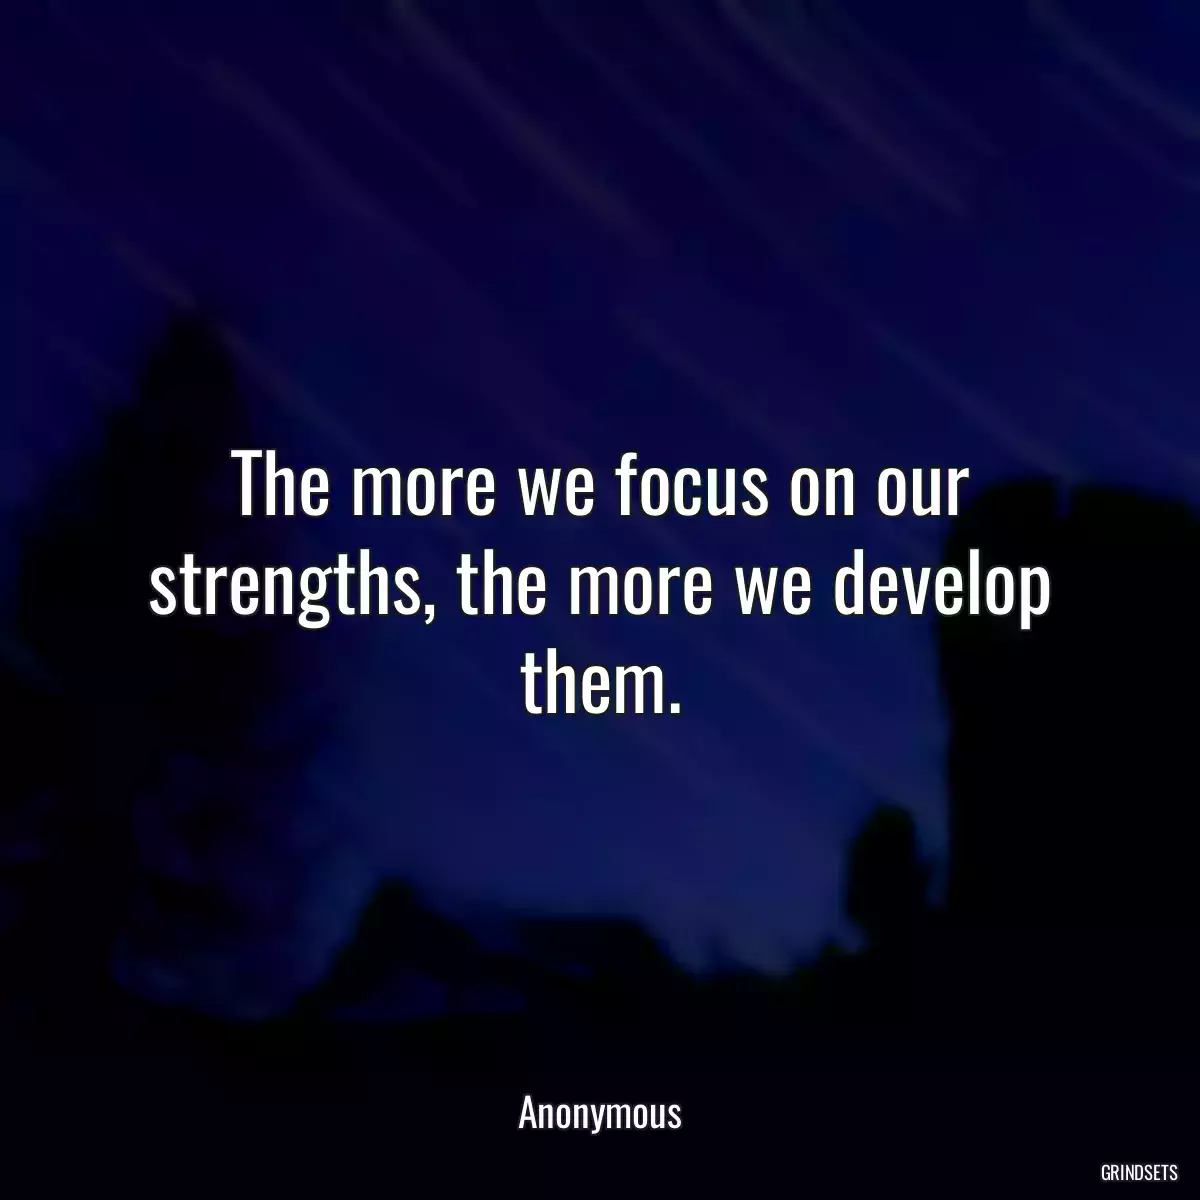 The more we focus on our strengths, the more we develop them.